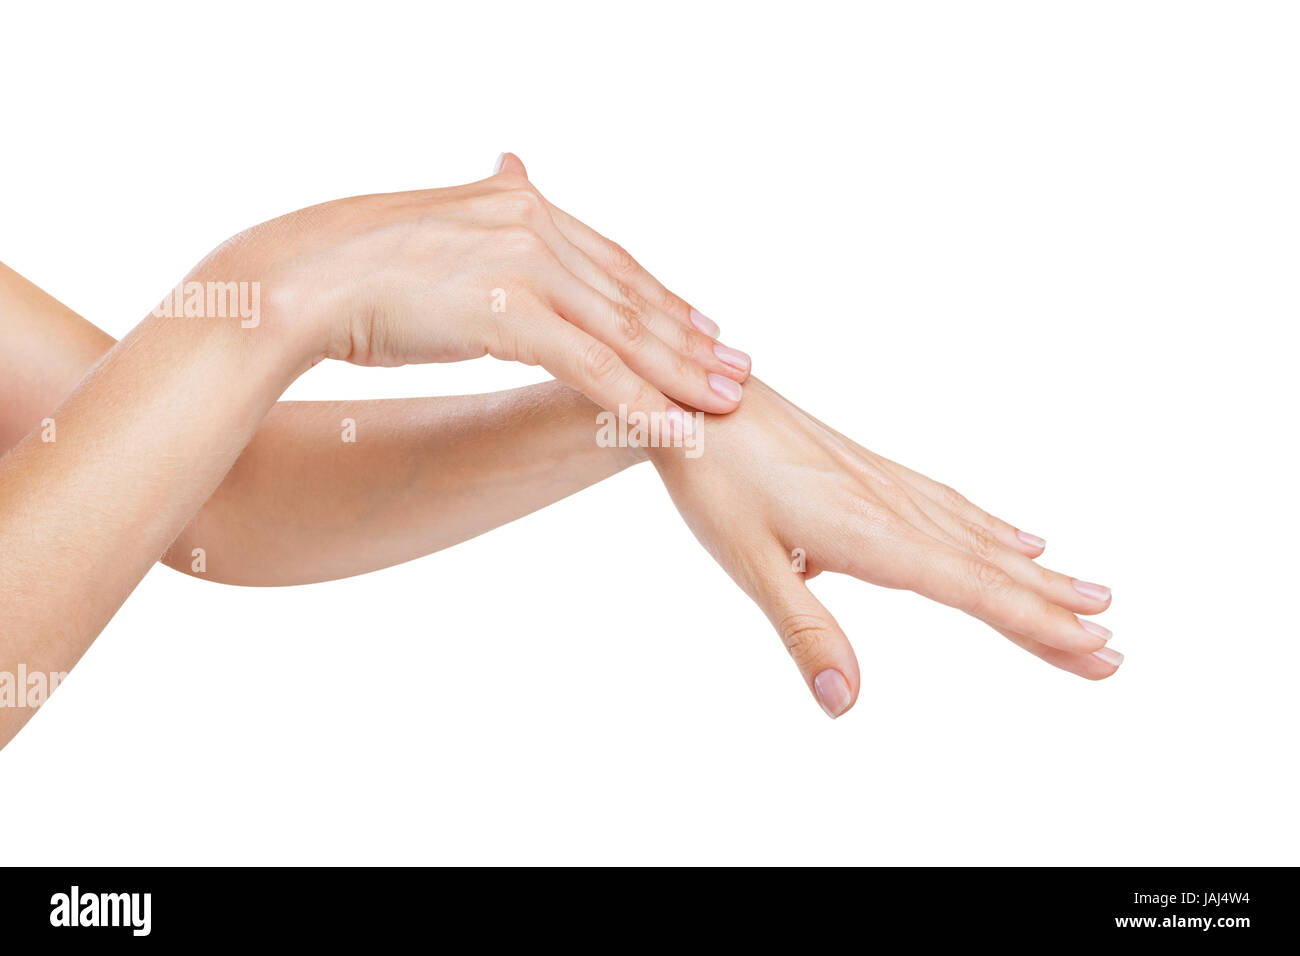 Woman applies cream on her hands isolated on white background Stock Photo